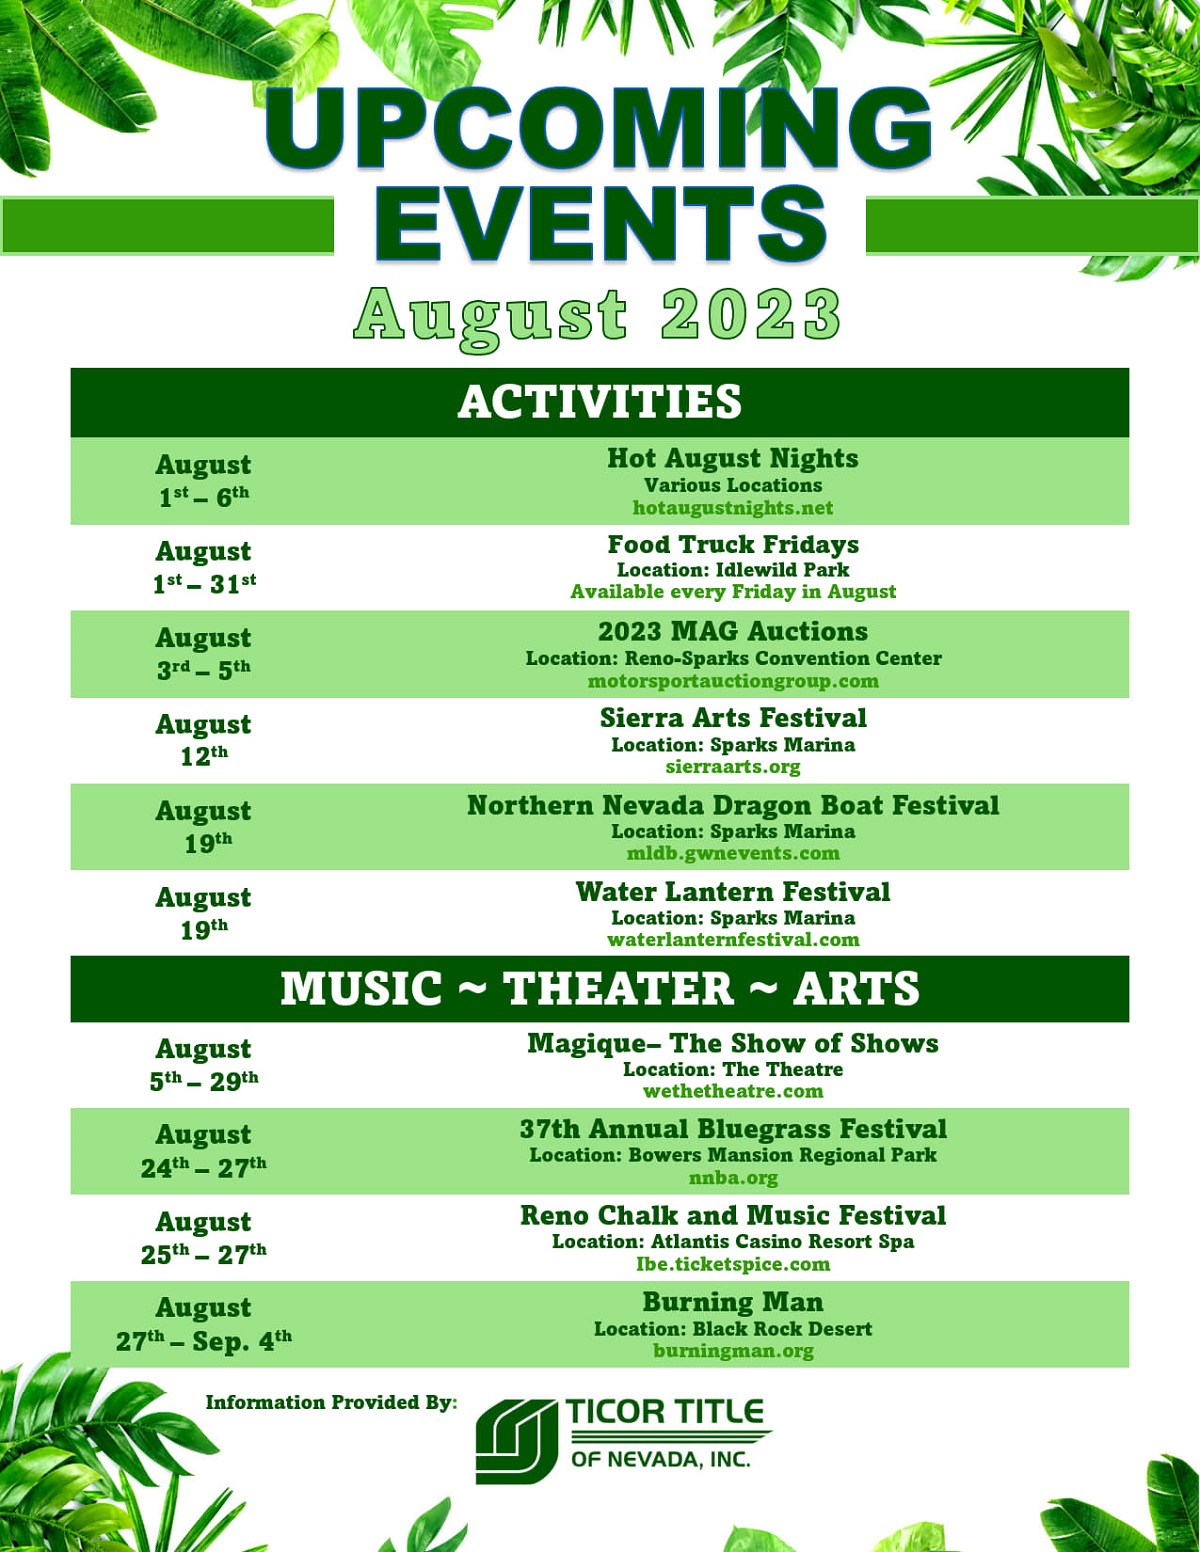 Upcoming Events image